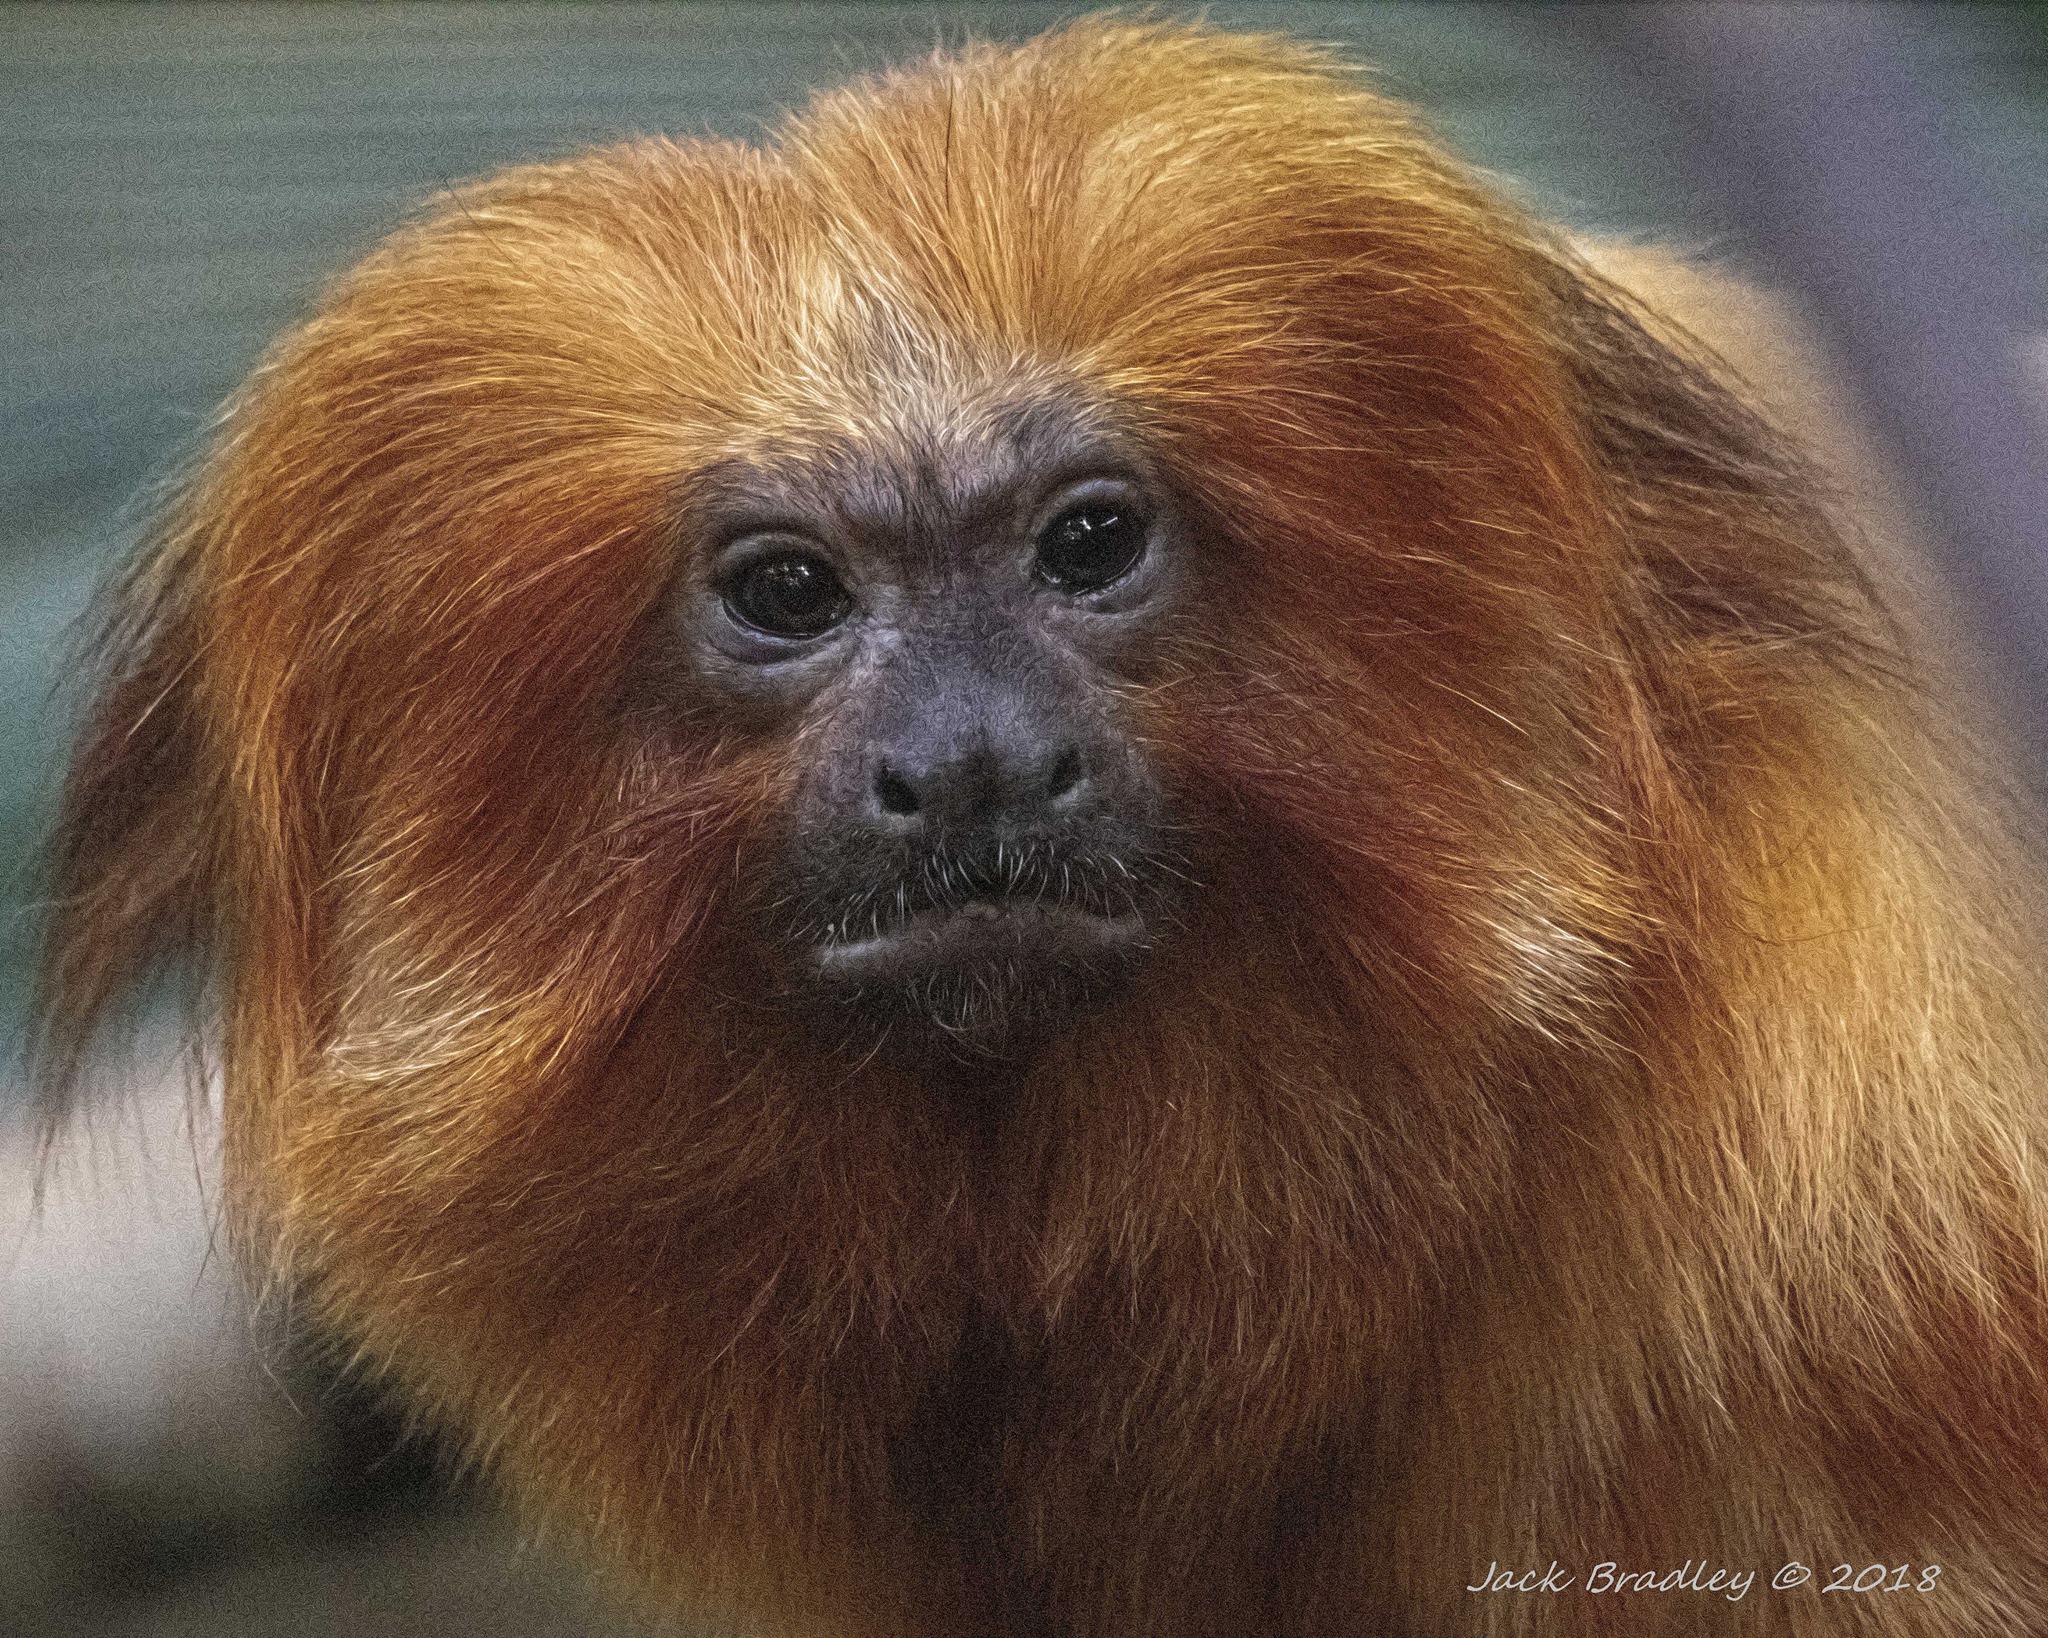 Ocelot and golden lion tamarin arrive at Connecticut's Beardsley Zoo